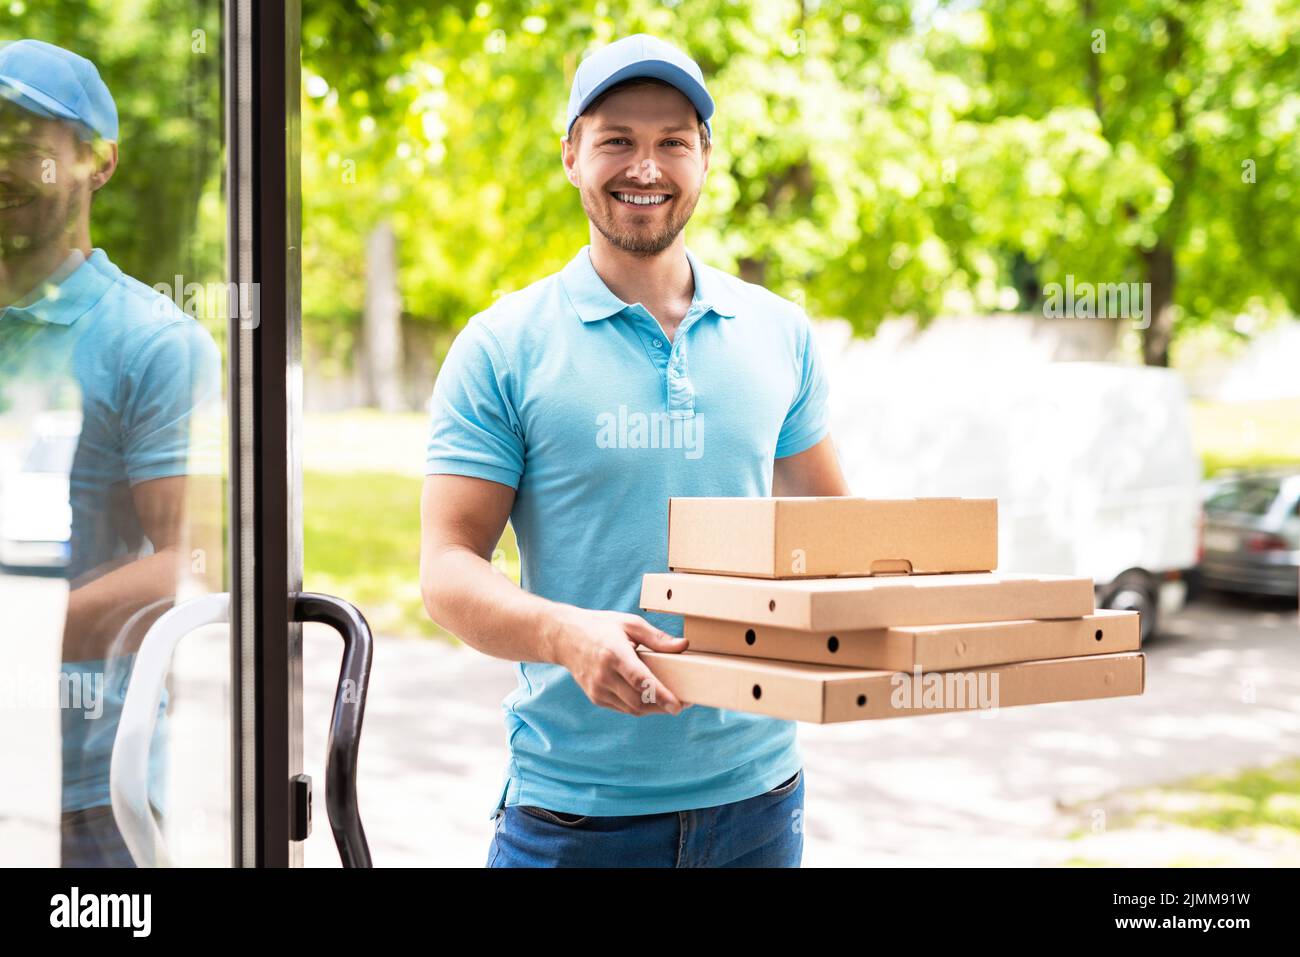 Smiling courier during pizza delivery near an entrance Stock Photo